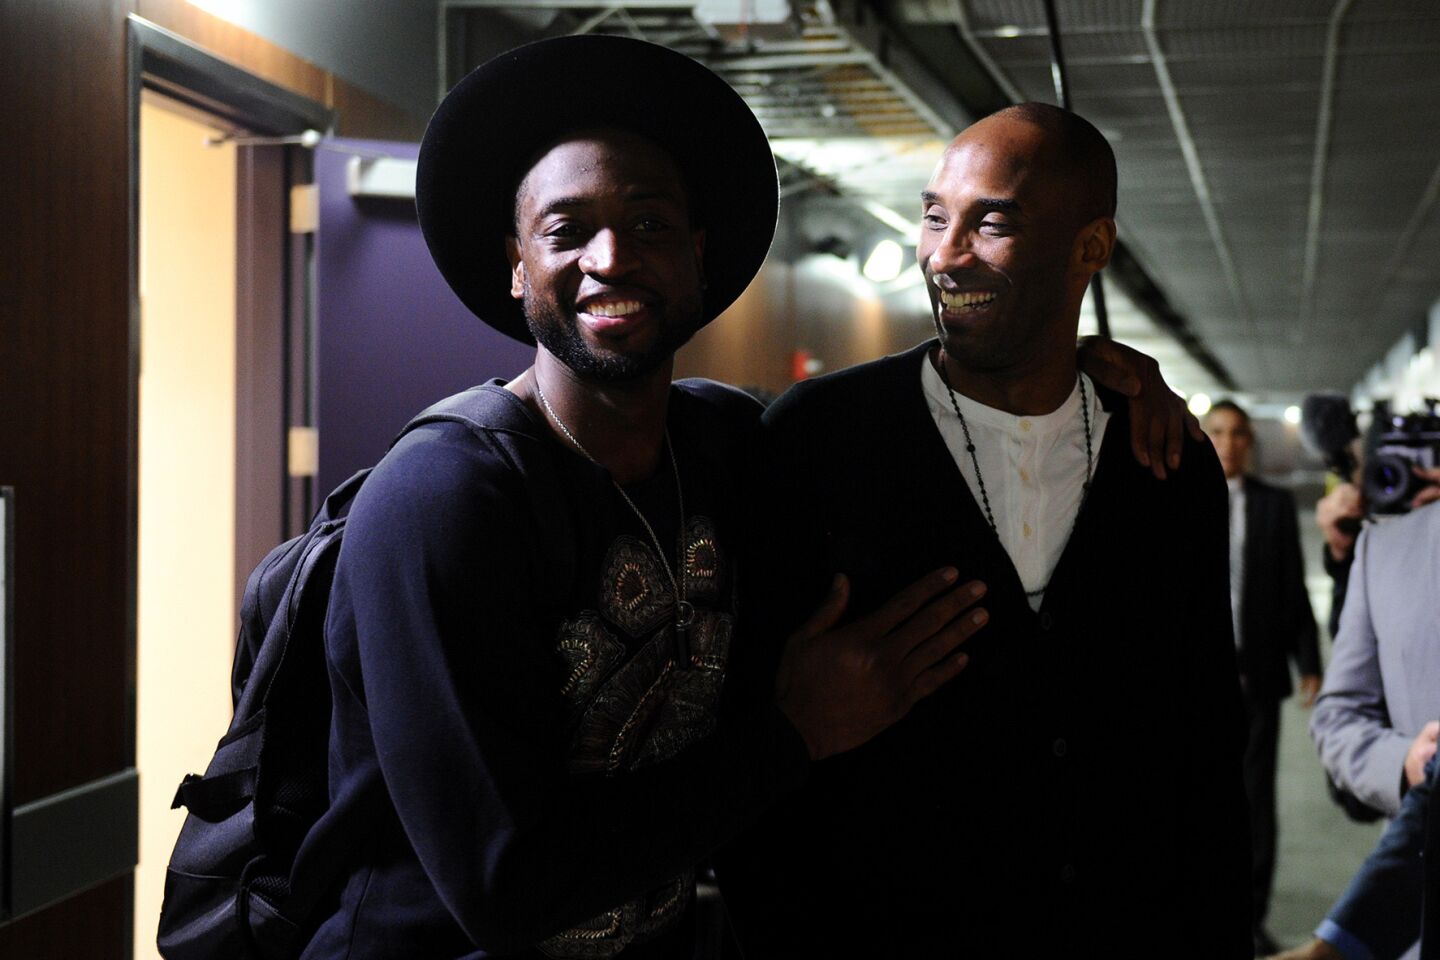 The Miami Heat's Dwyane Wade, left, and Kobe Bryant share a laugh after a game at Staples Center on March 30.